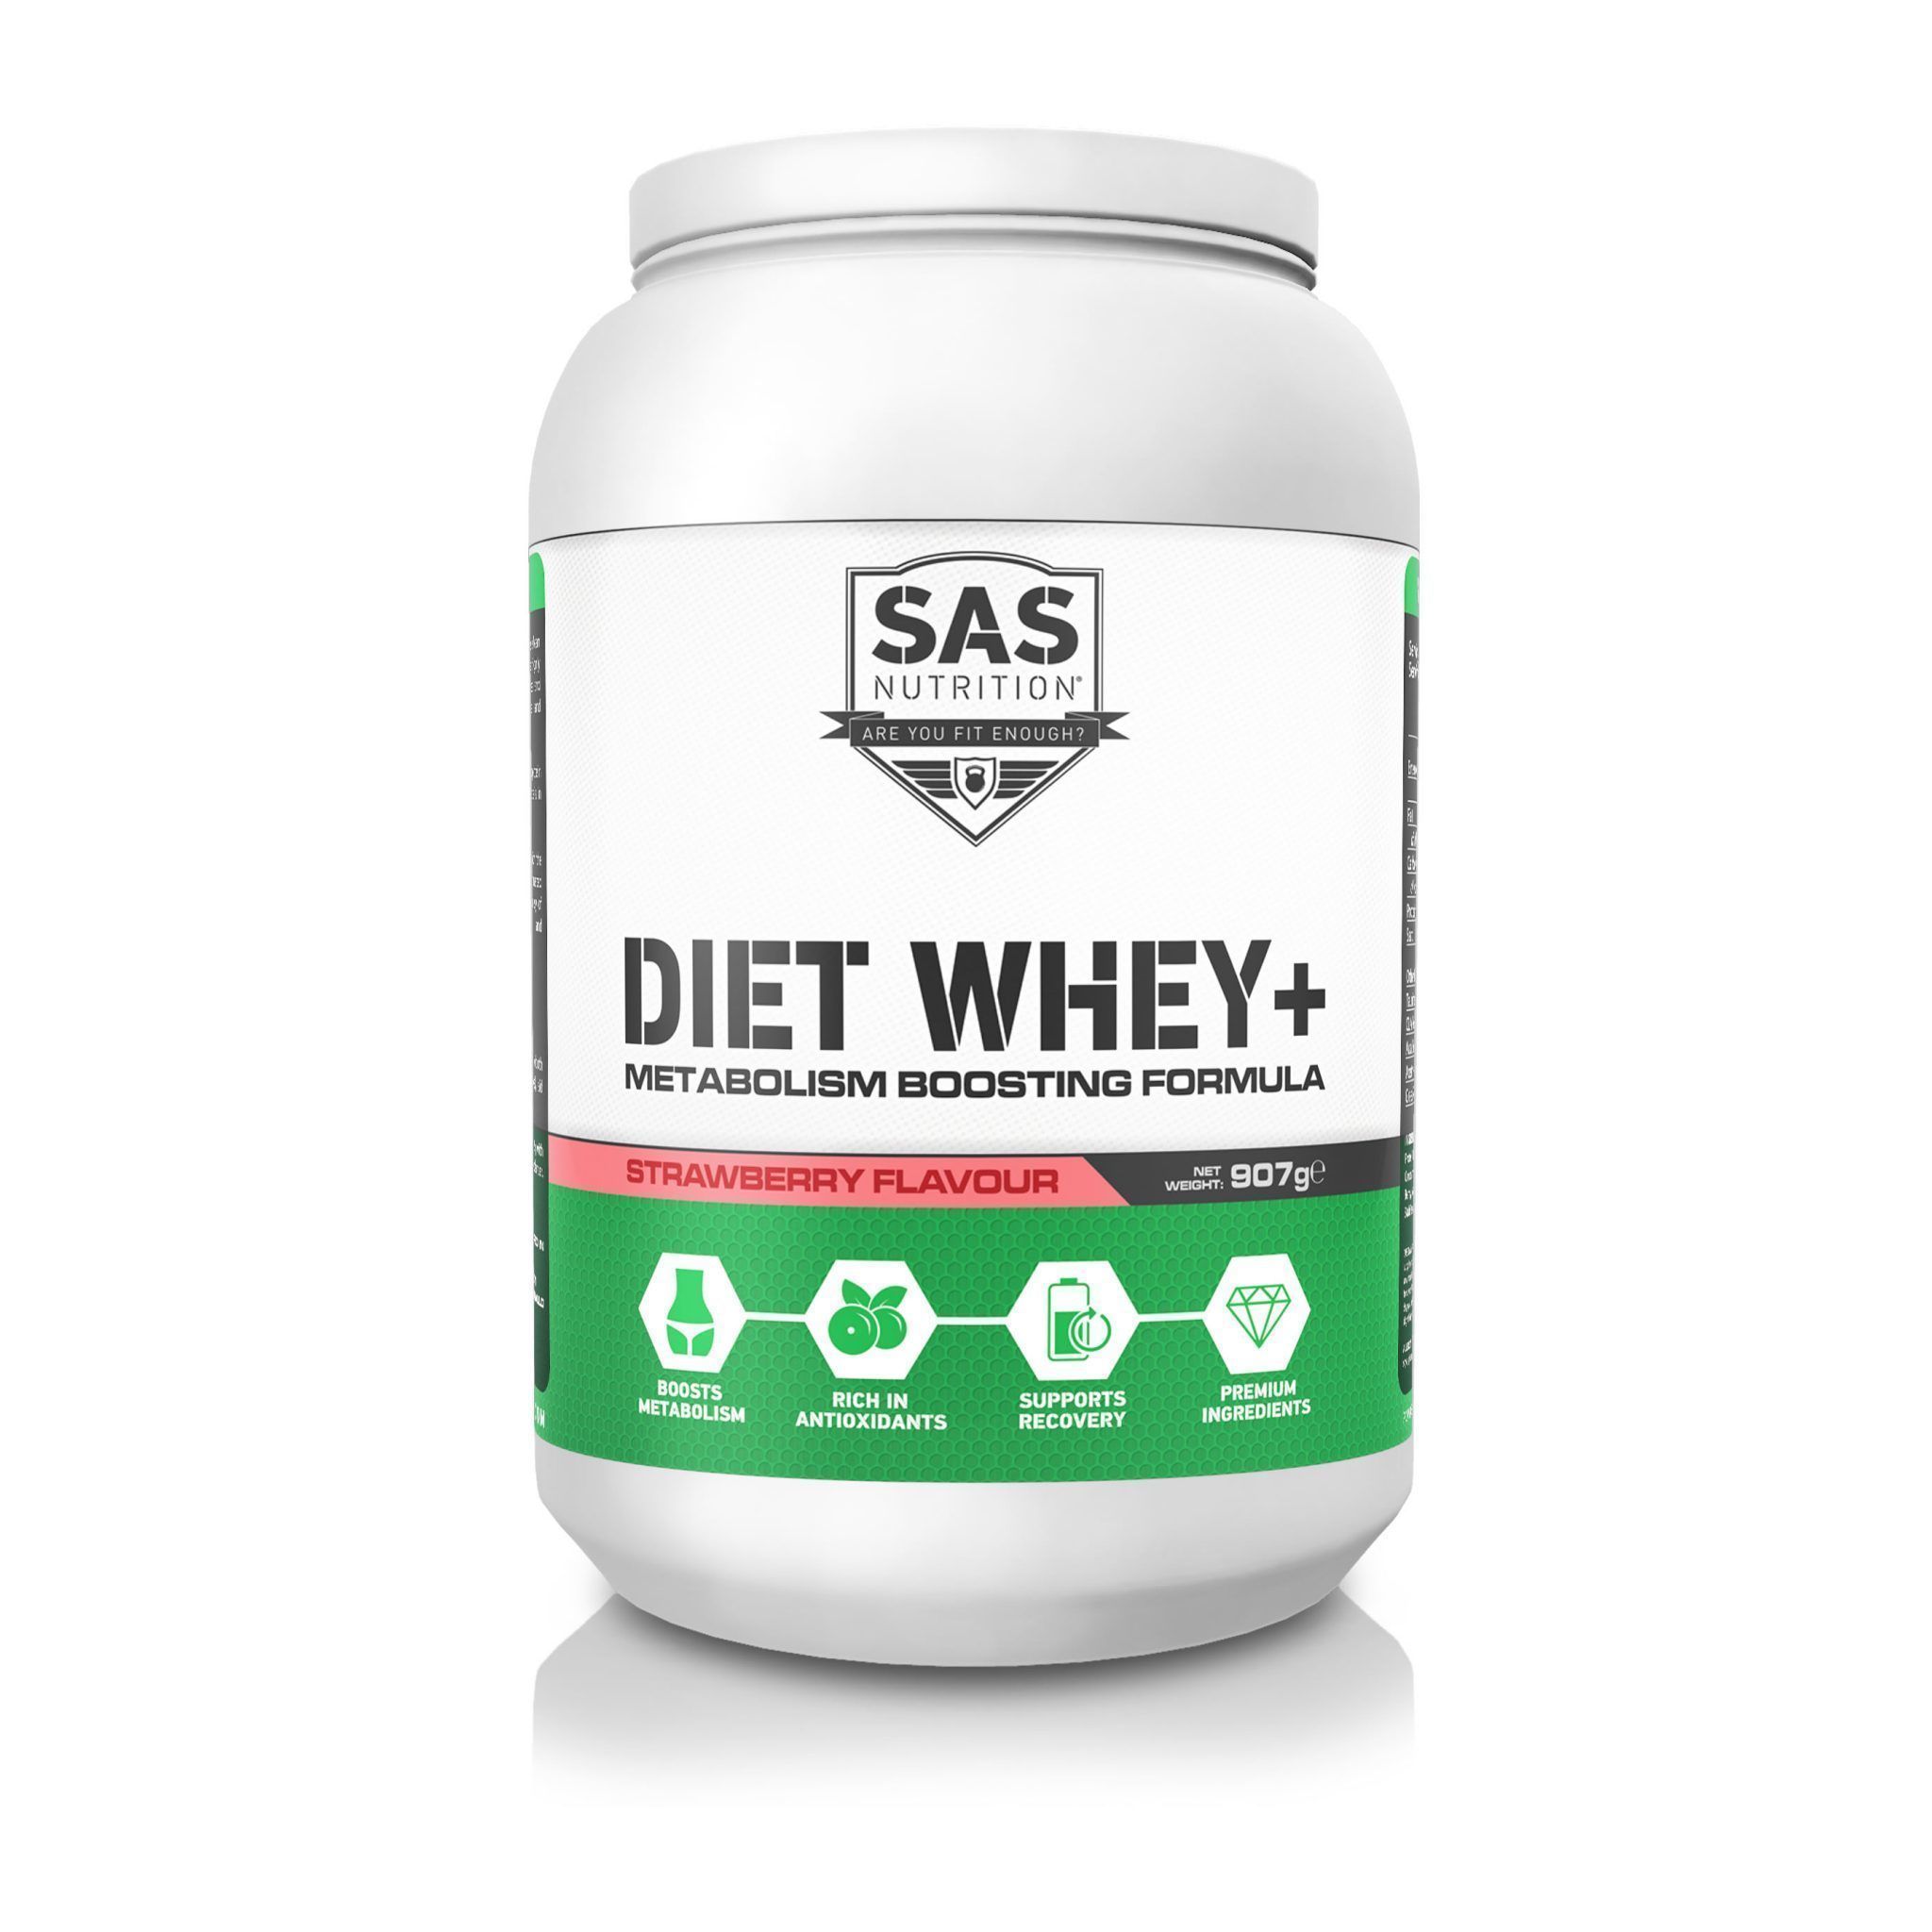 DIET WHEY+ - Whey Protein, Protein, Weight Loss, SAS Nutrition